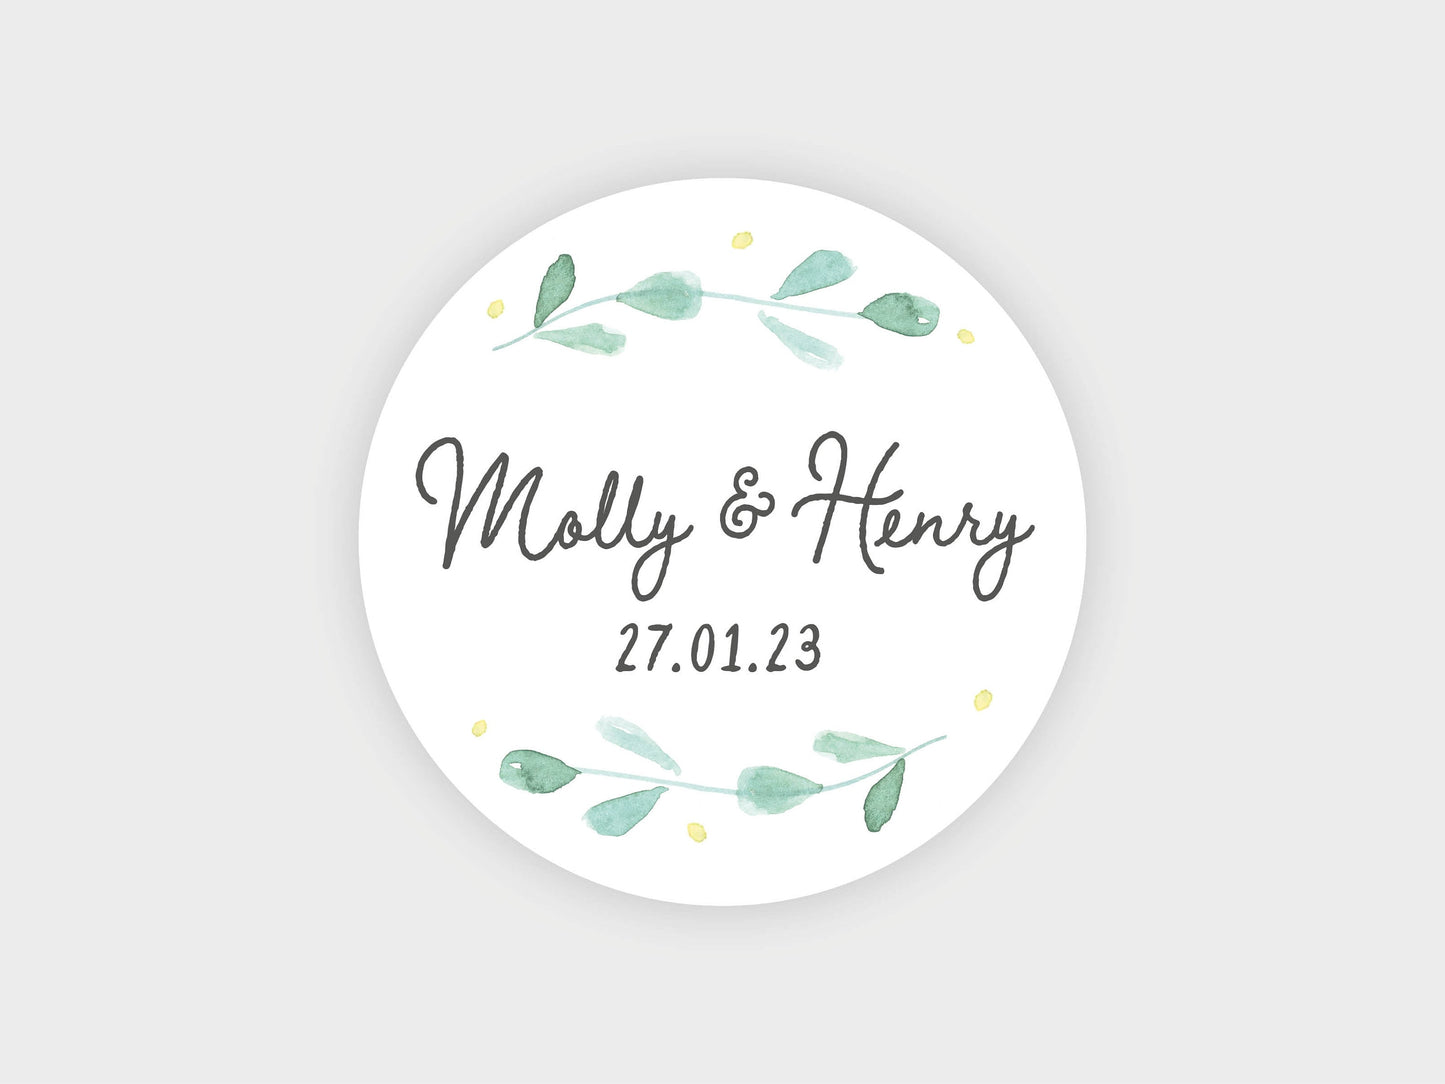 Wedding sticker | Personalised with your names and wedding date VA212